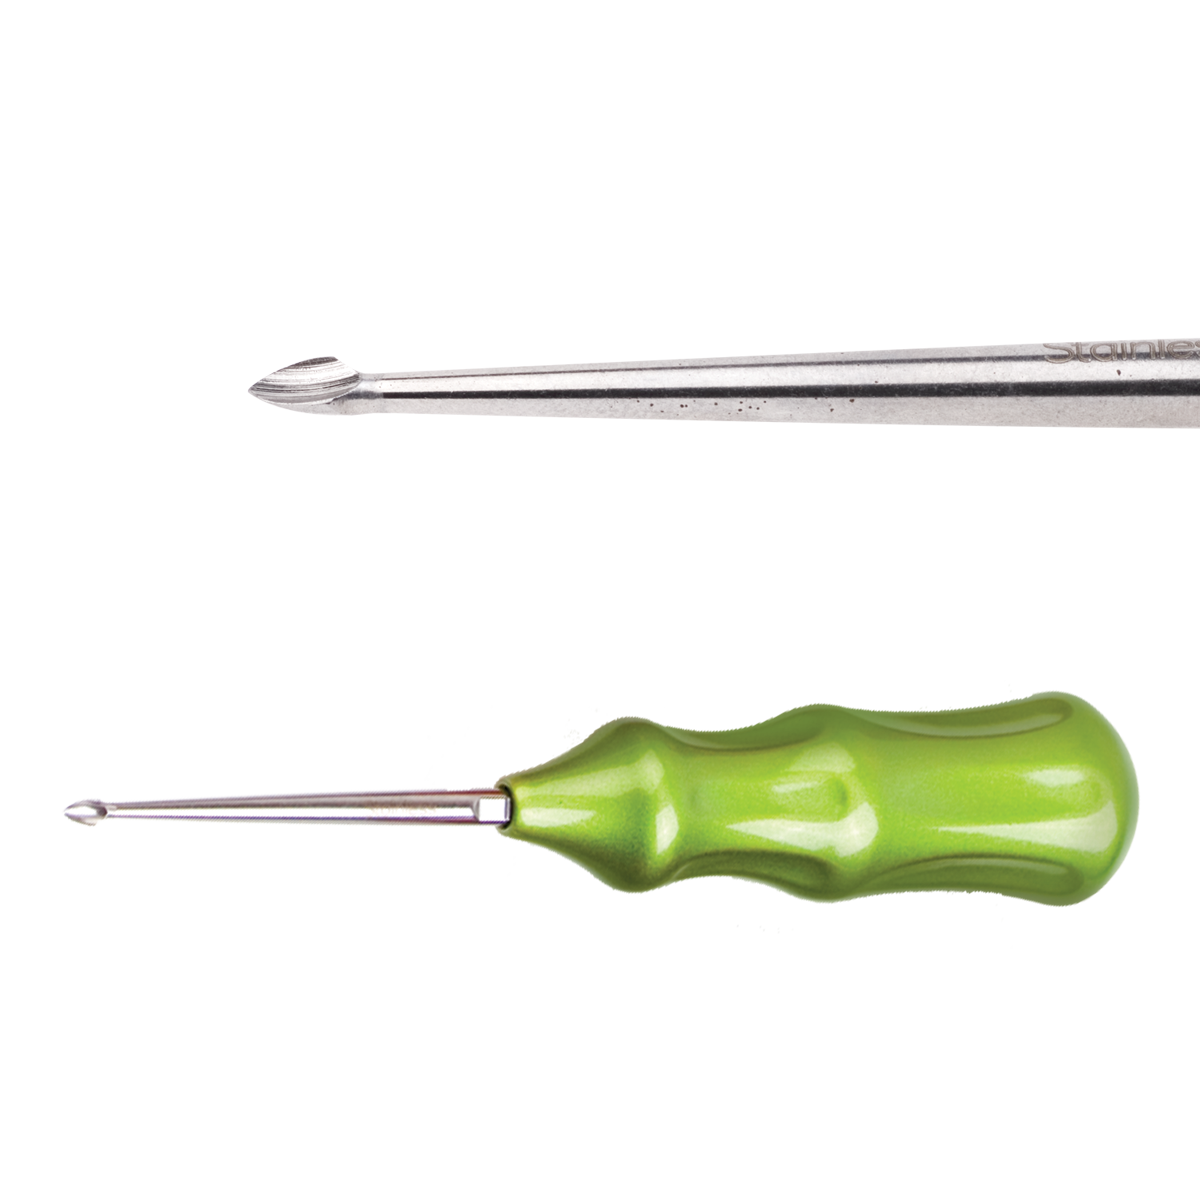 EAZ Out Extractor (4.0 MM Spoon)